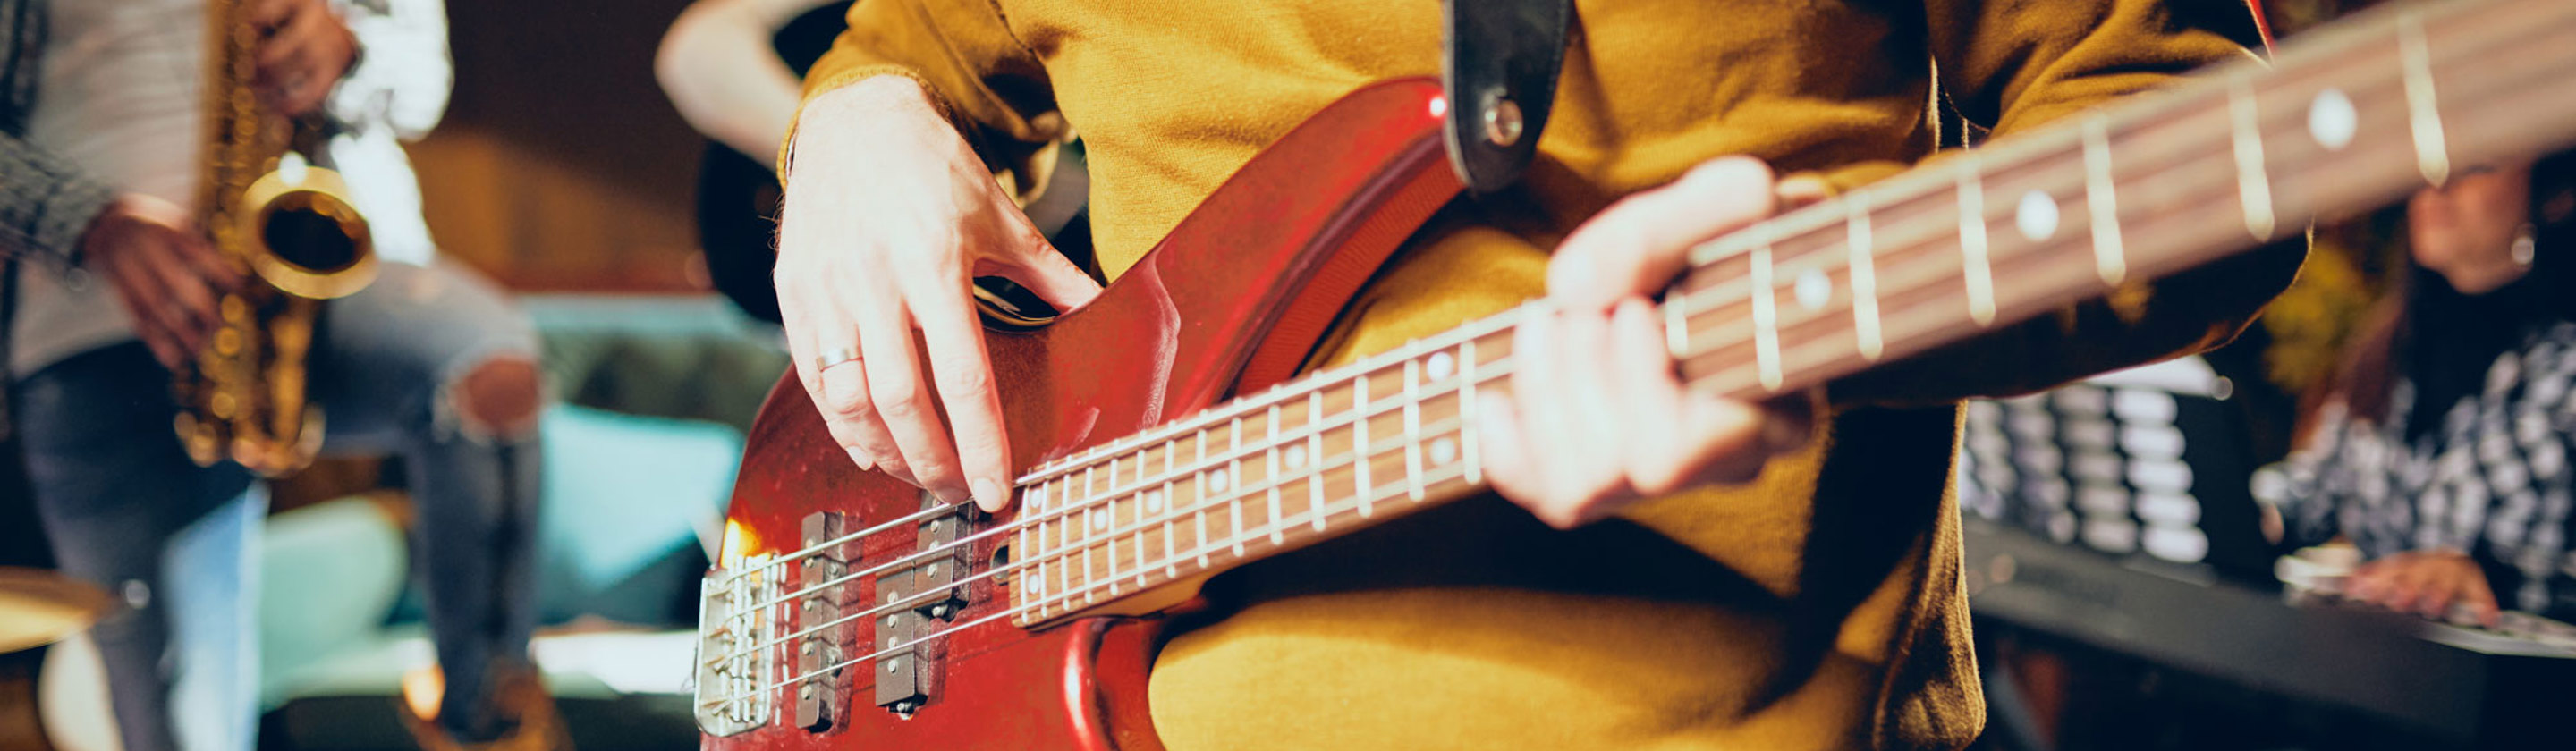 A person strumming an electric guitar